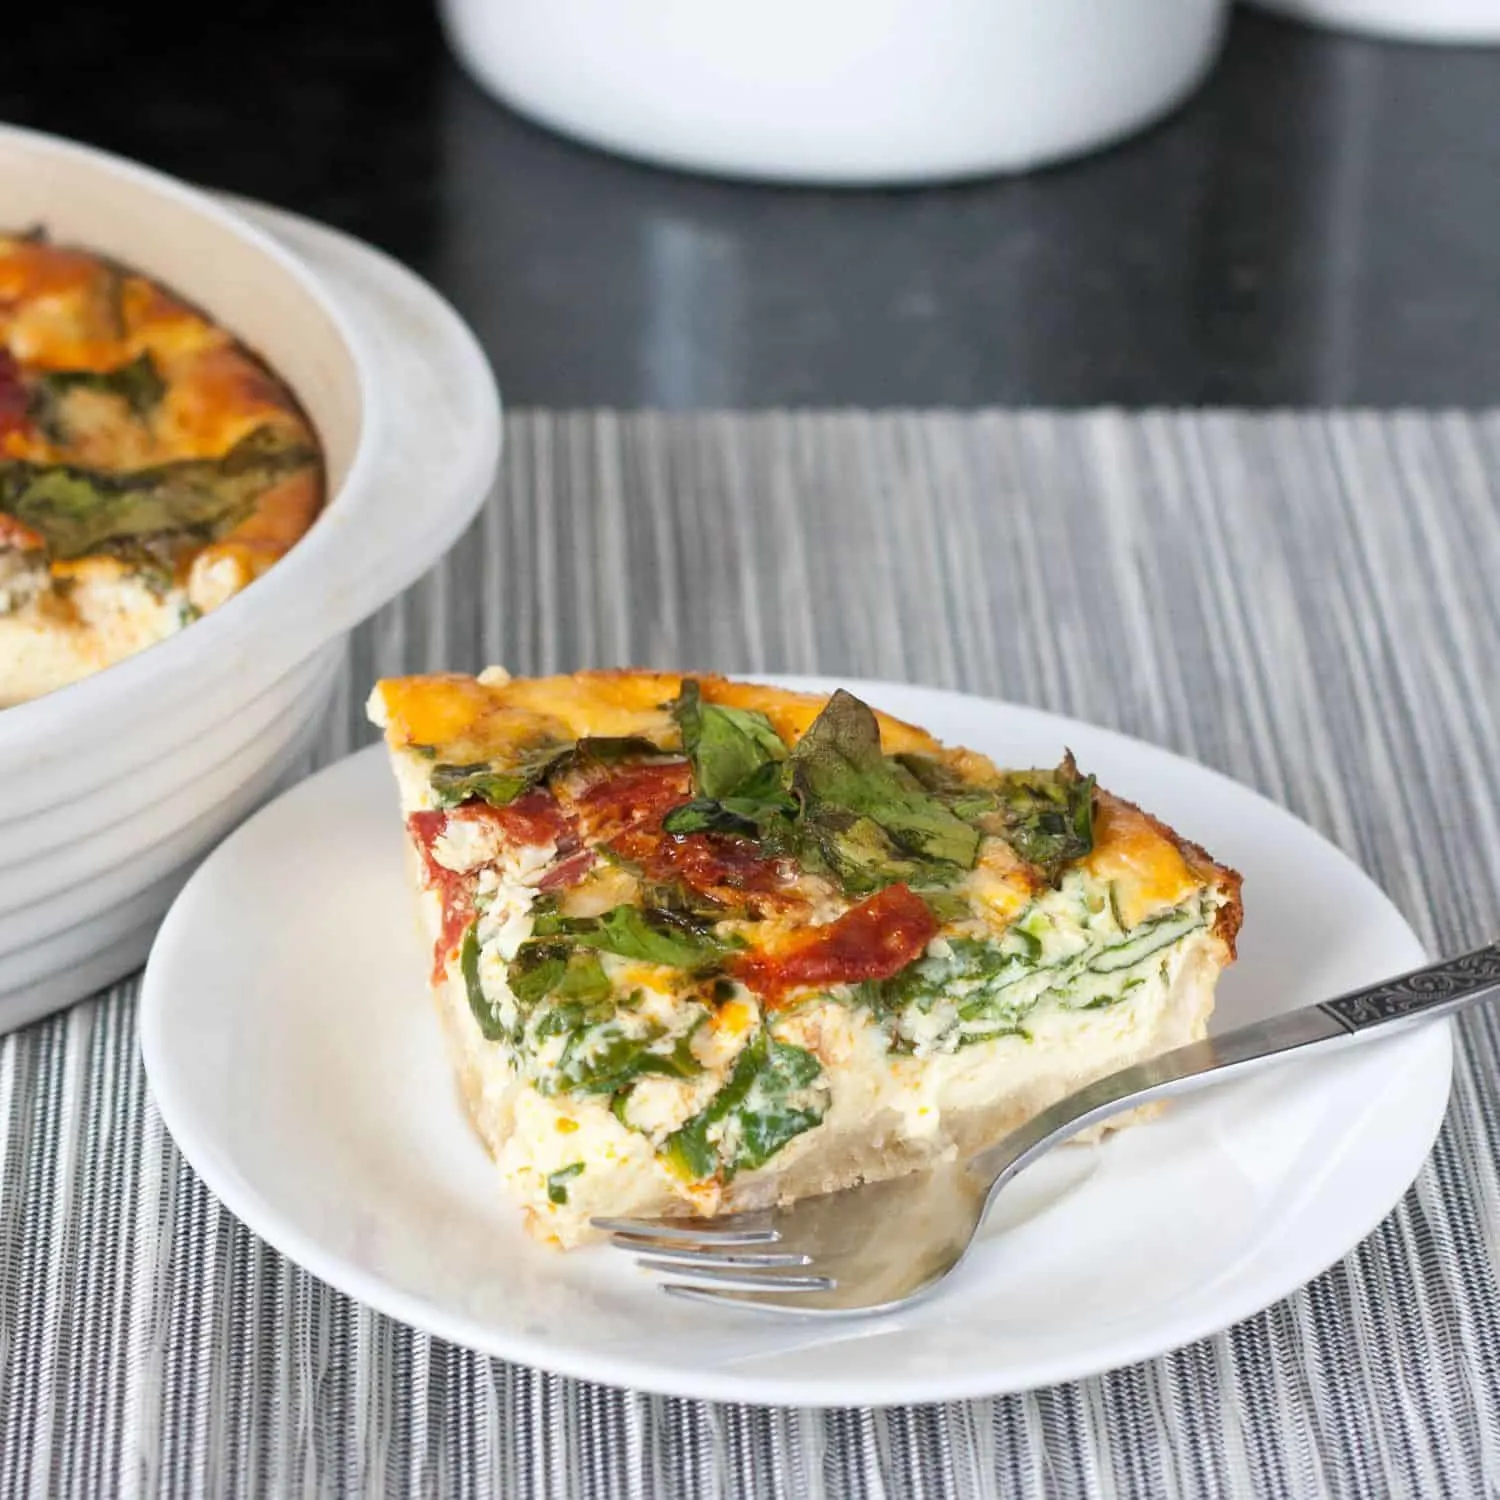 Easy Spanish Chorizo, Manchego, Spinach Quiche with an olive oil crust. With only minutes of active prep time, you can create an impressive dish perfect for a light meal. Get the recipe on GoodieGodmother.com